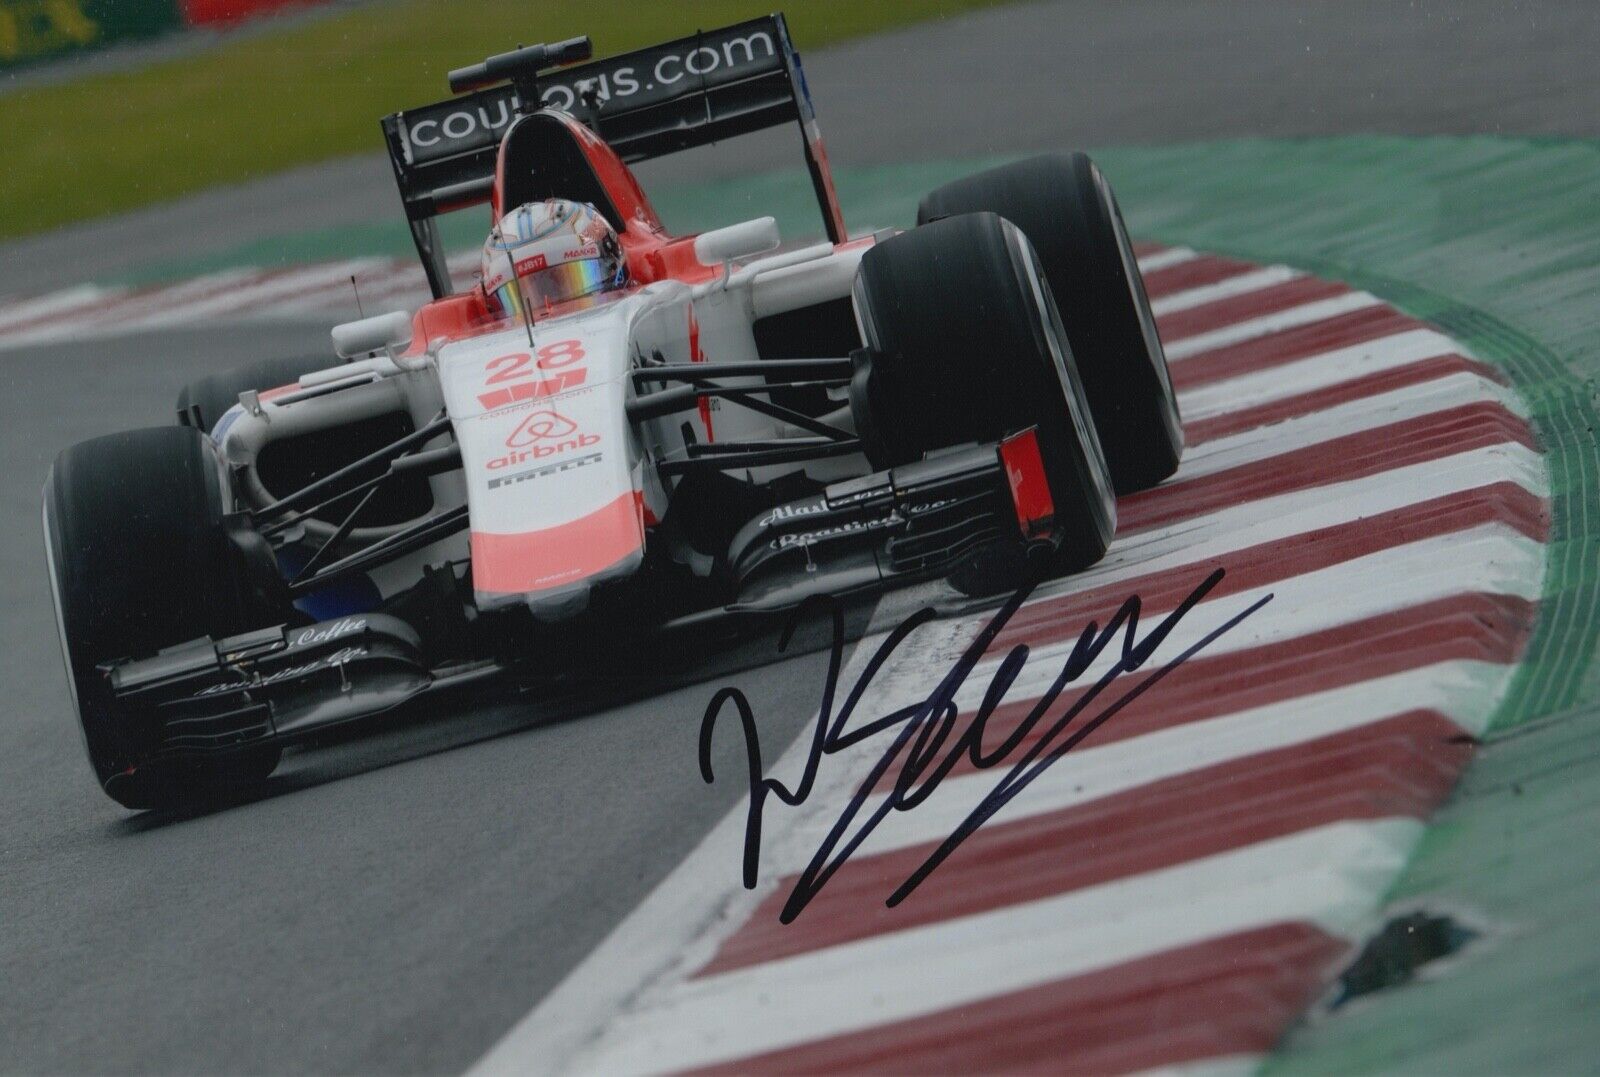 Will Stevens Hand Signed 12x8 Photo Poster painting F1 Autograph Manor Marussia 14